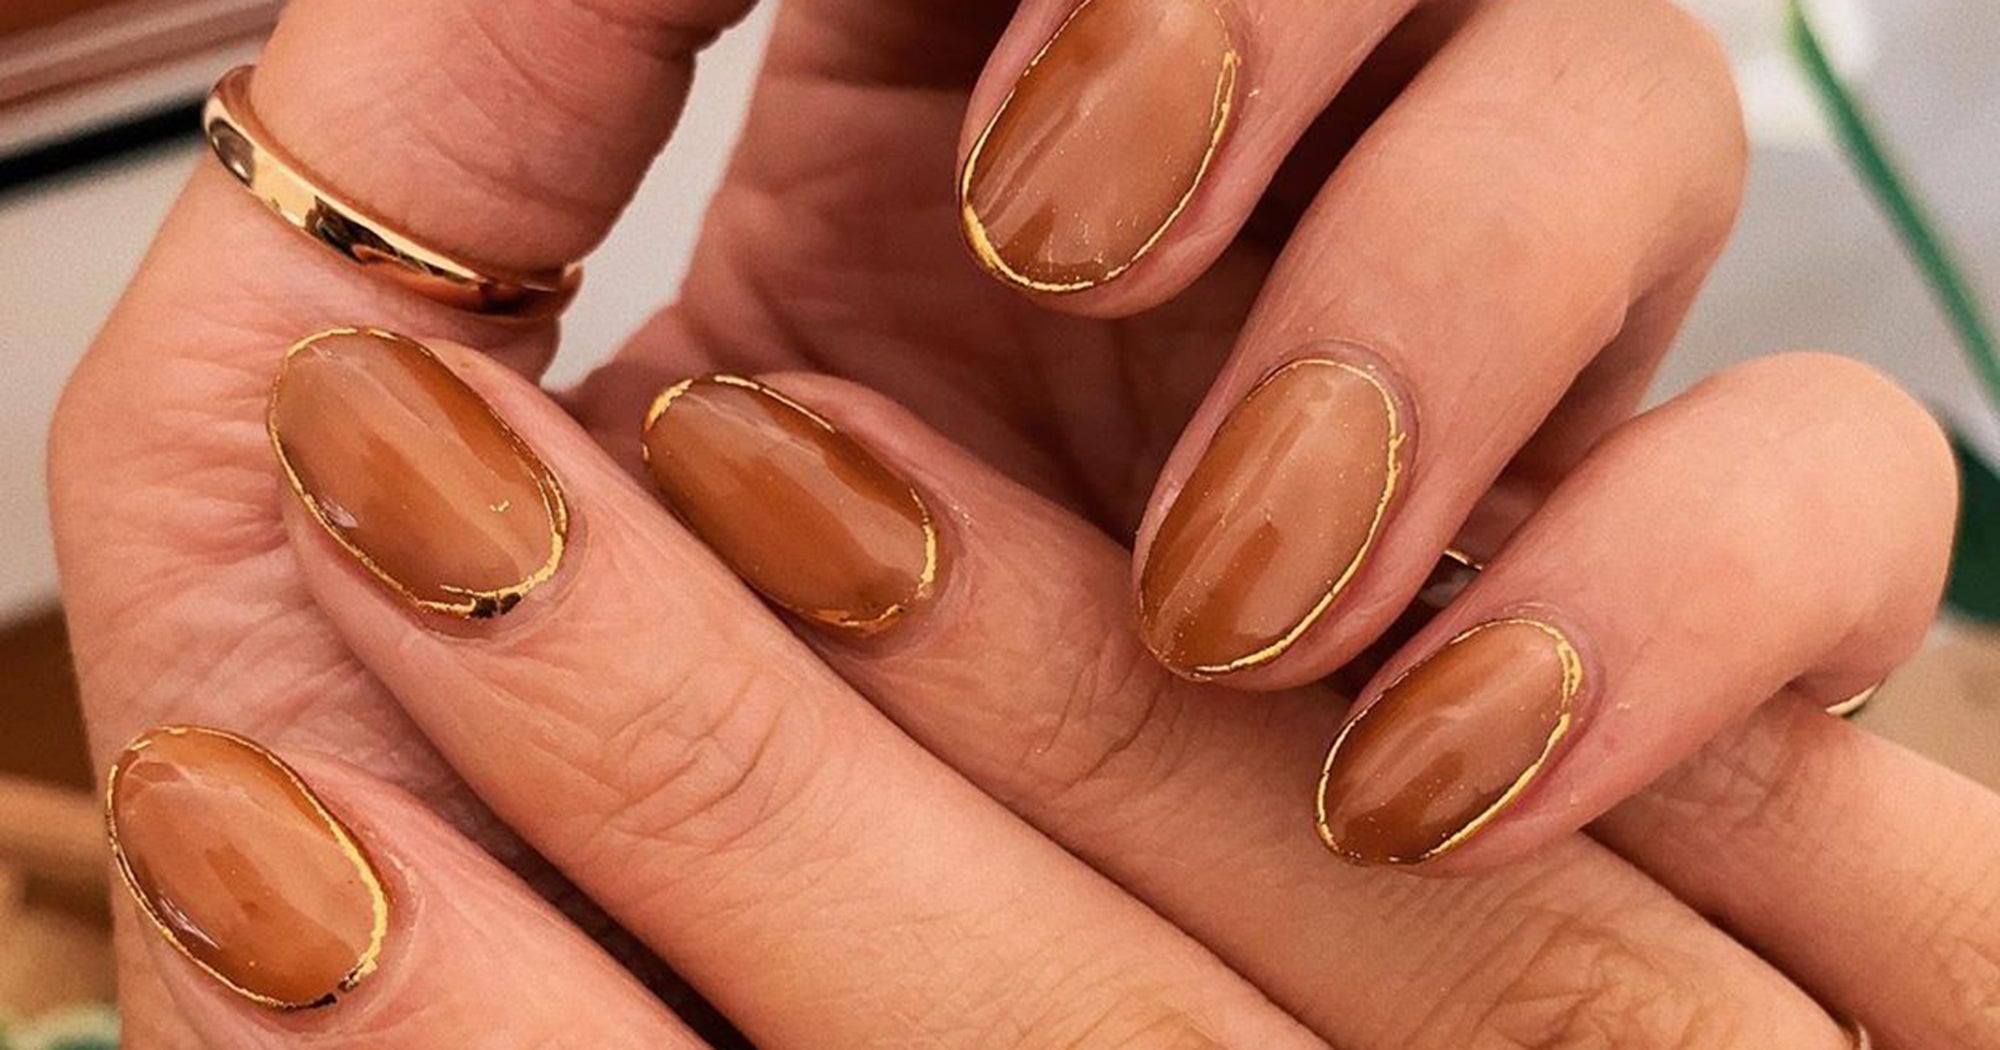 3. "Trendy and Chic Nail Art Ideas for Long Nails" - wide 3